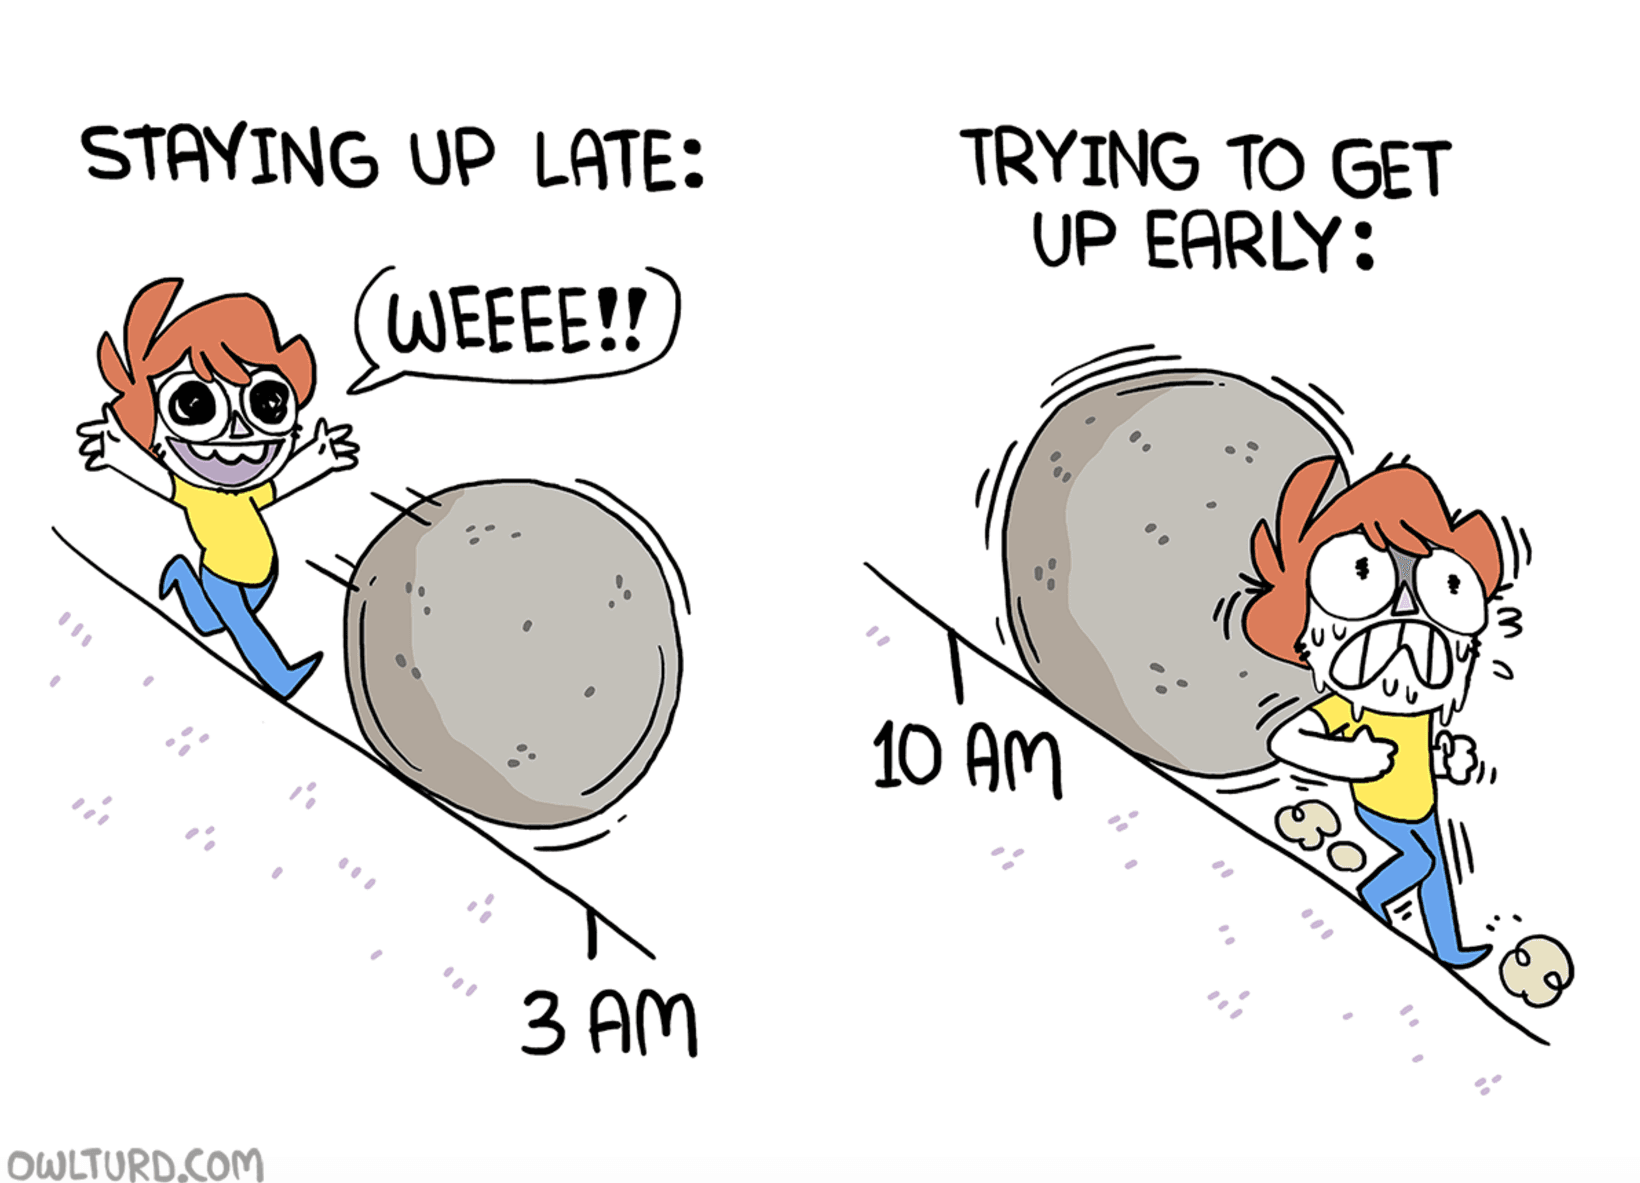 Træ T Pasture These Webcomics By Owlturd Are Insanely Funny (And Relatable)